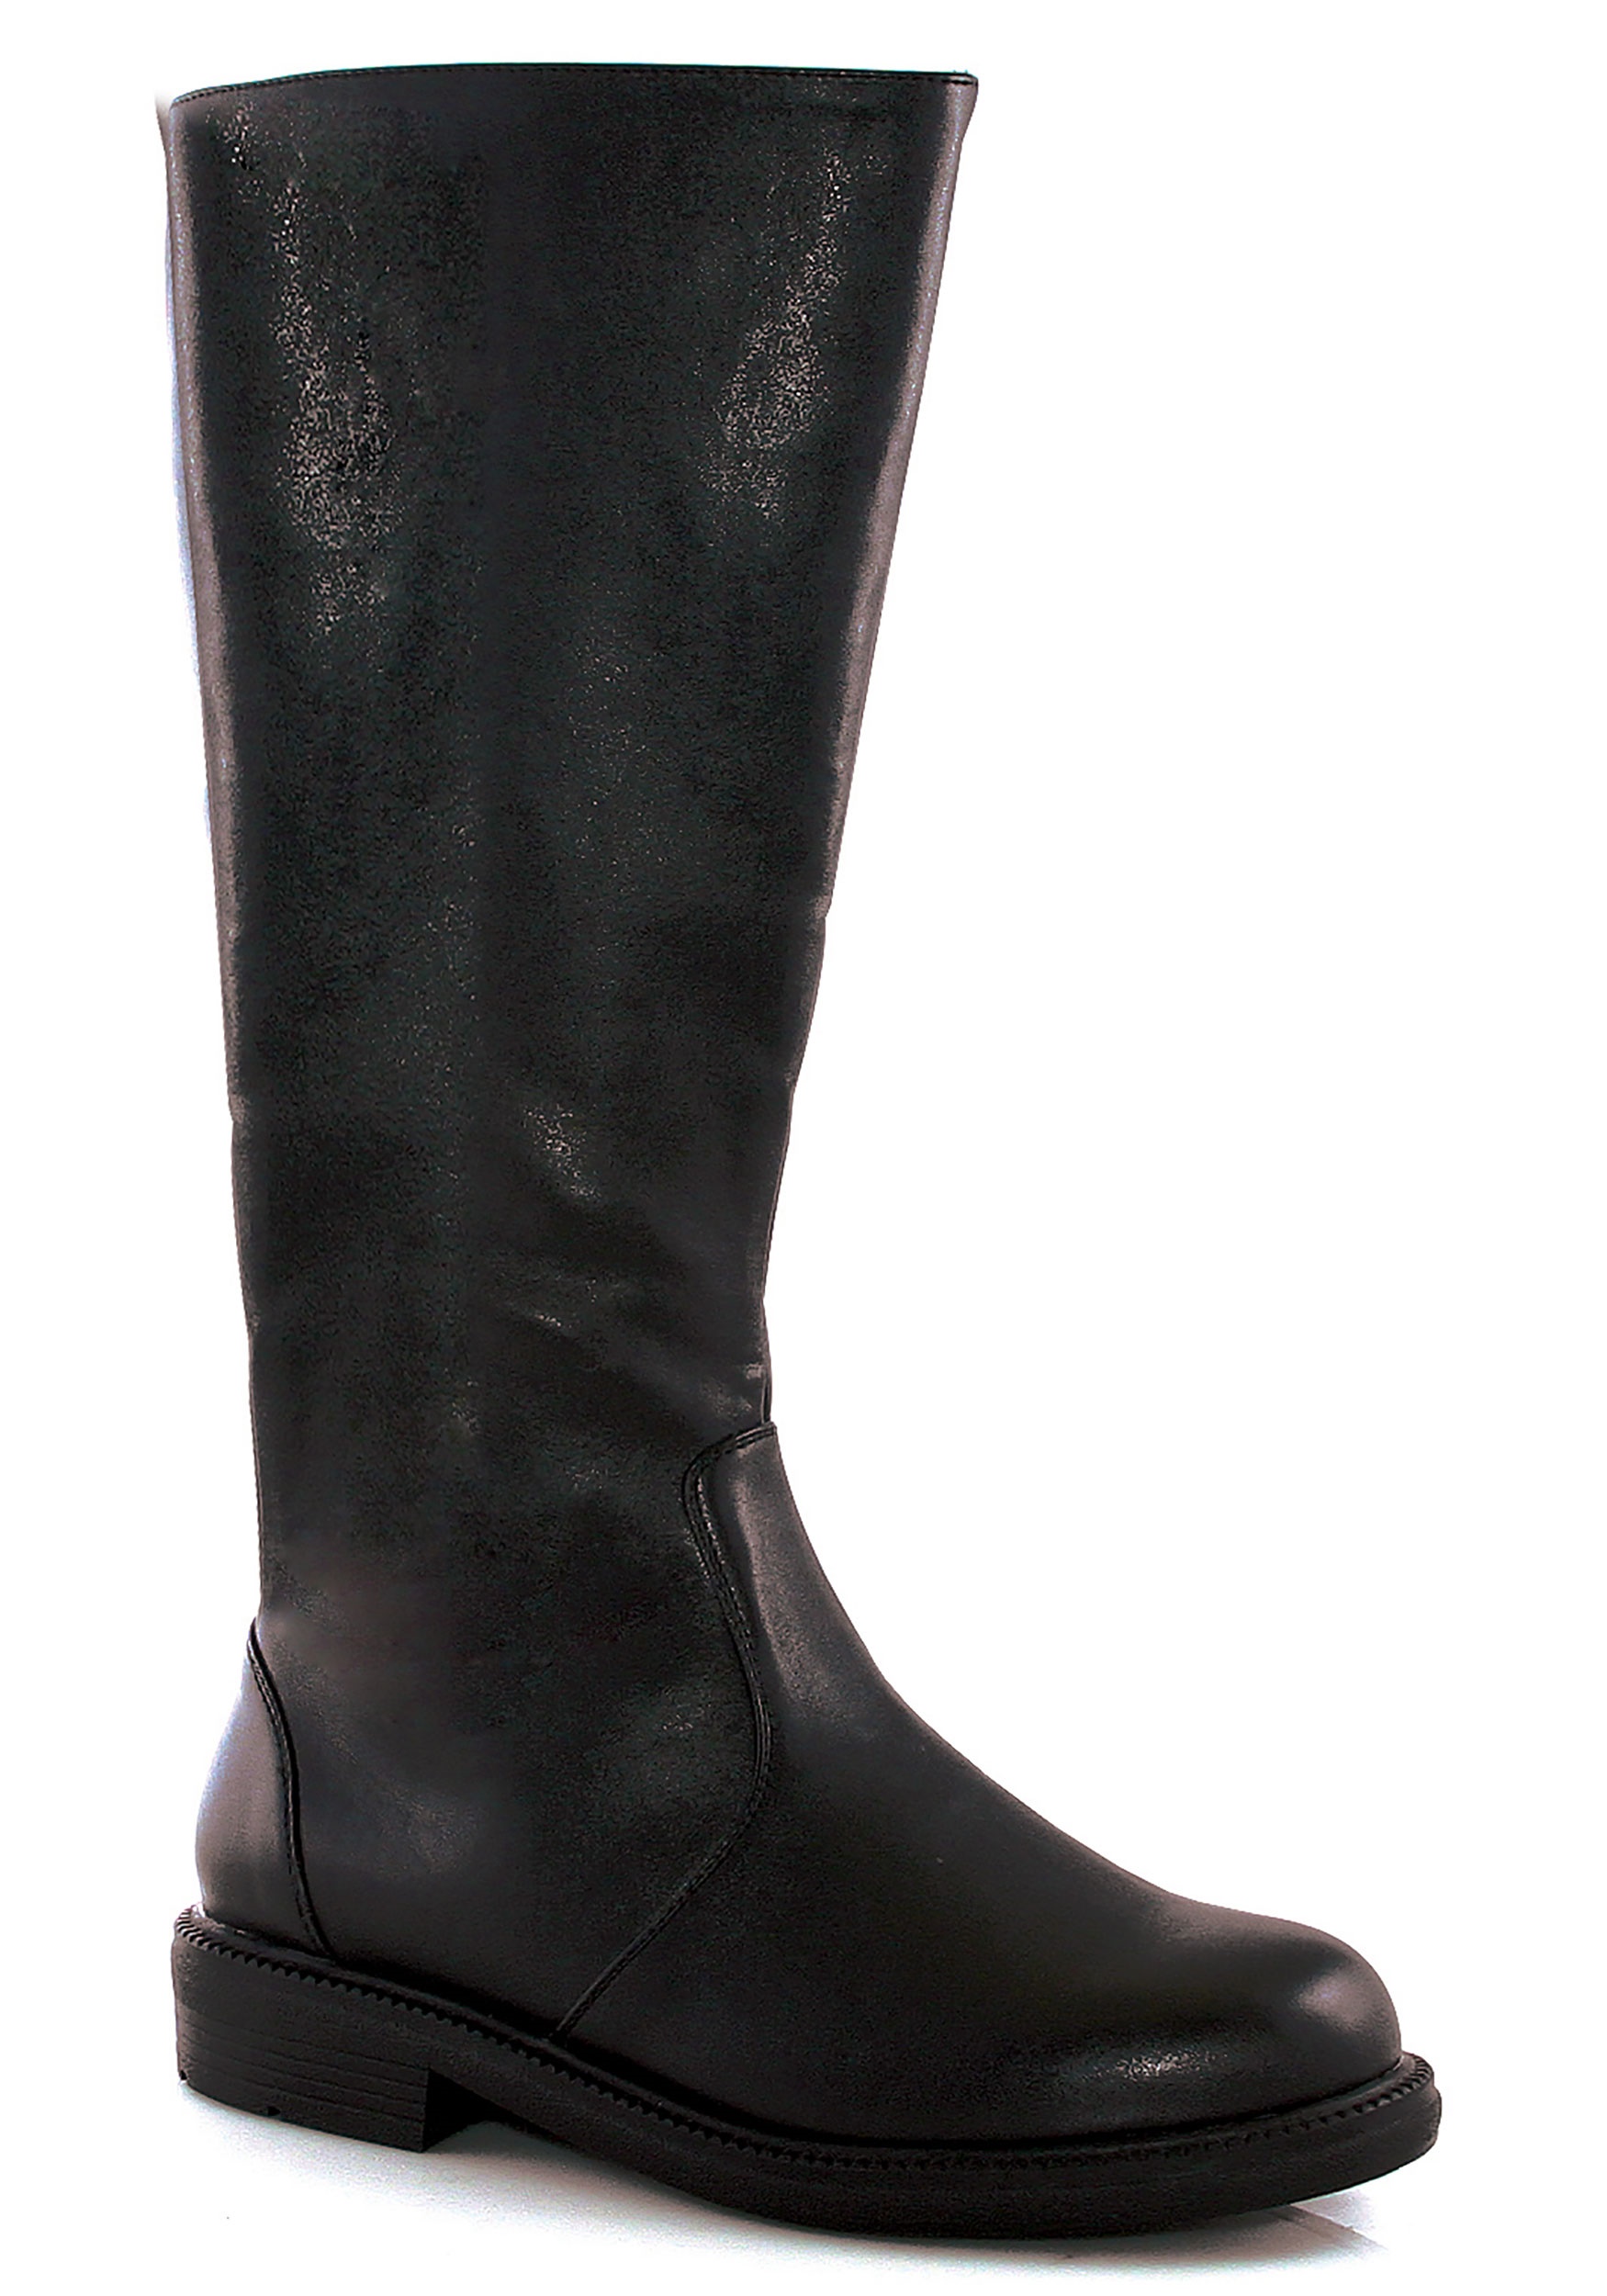 Image of Men's Tall Black Costume Boots ID EE125MATEY-S